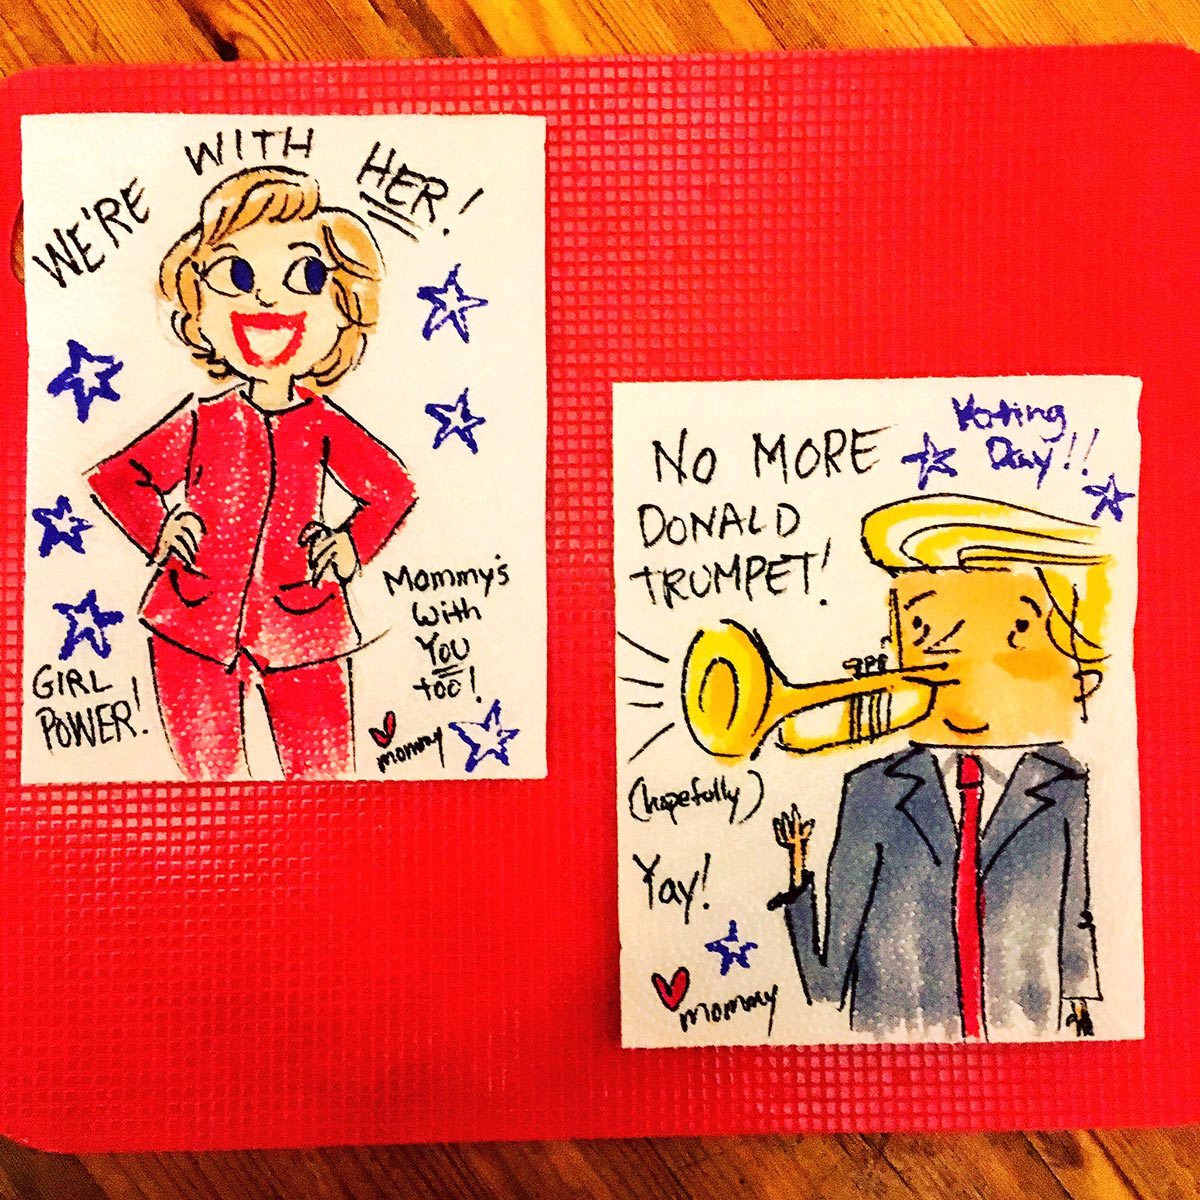 Hillary Clinton and Donald Trump by Aliki Theofilopoulos.